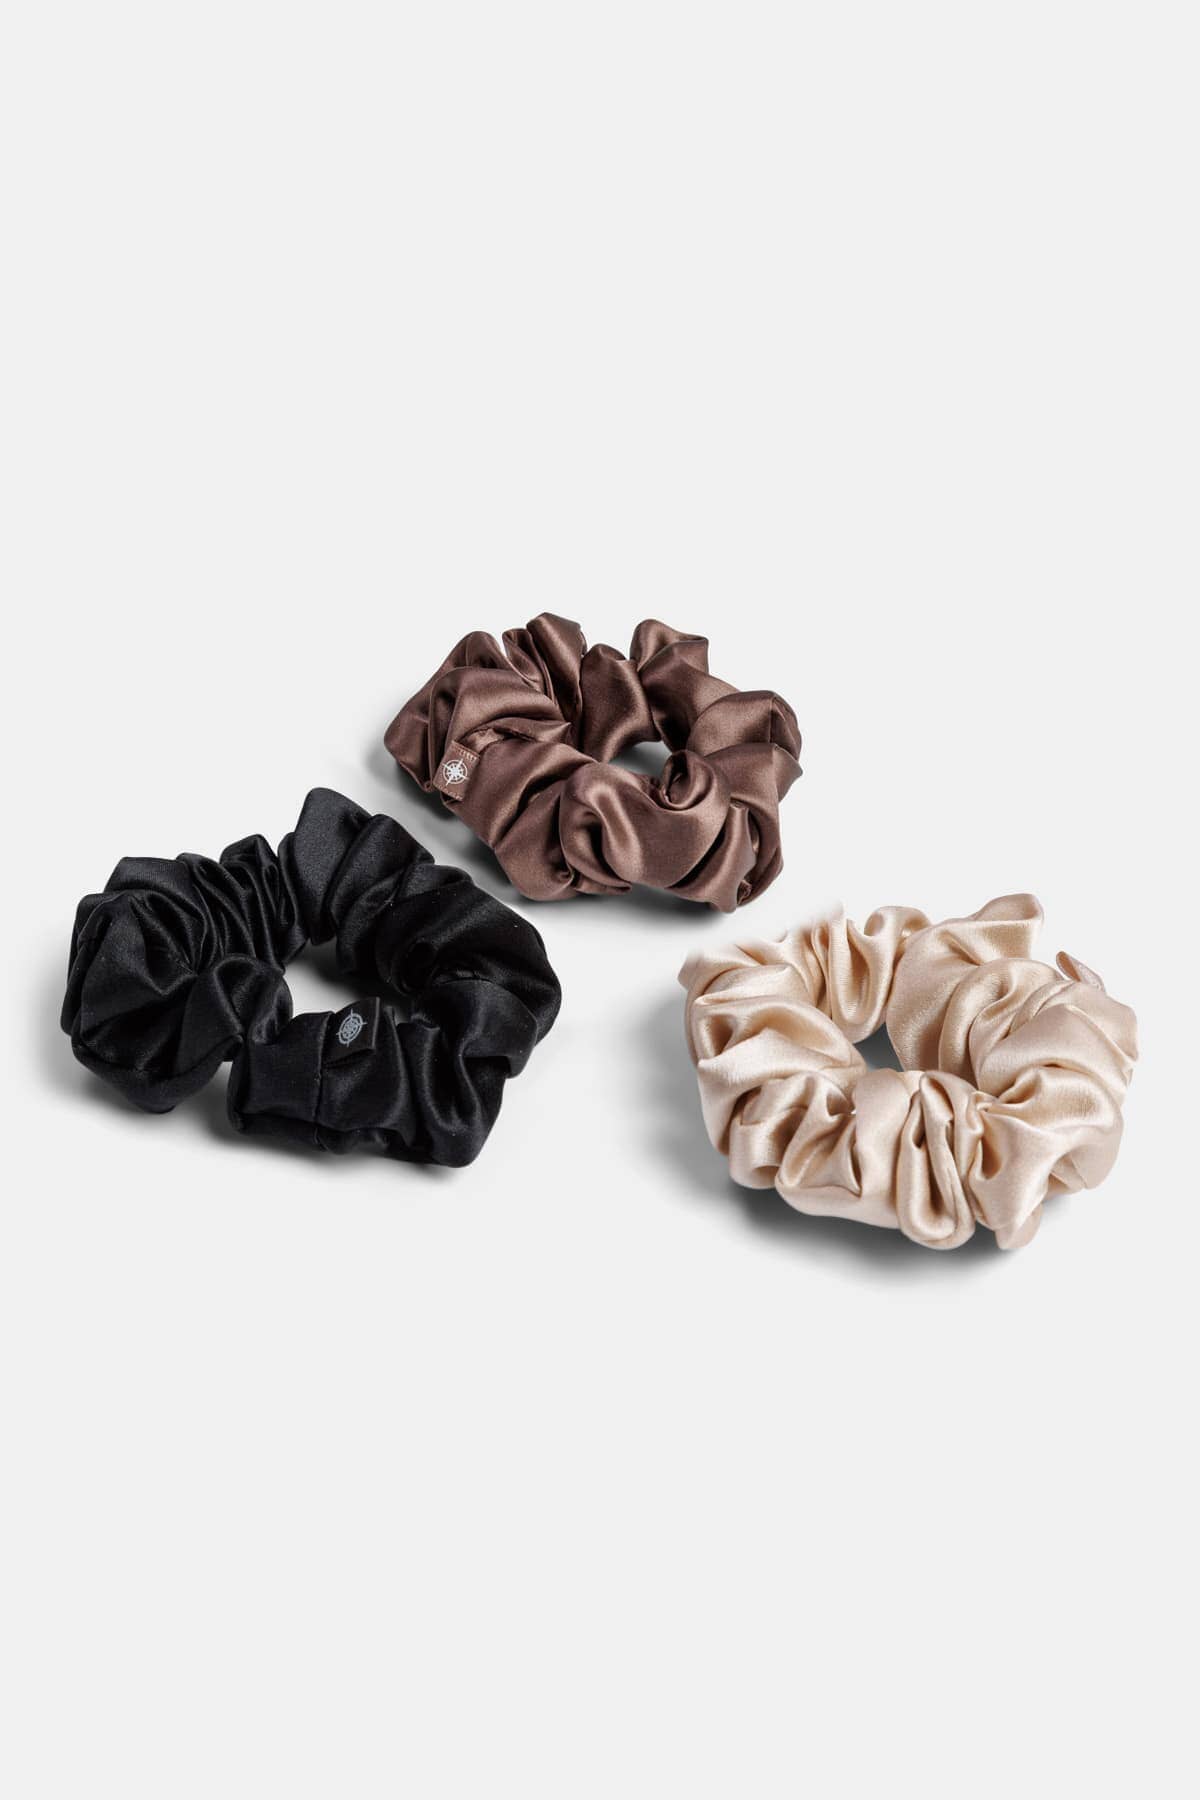 100% Pure Mulberry Silk Hair Scrunchies with Gift Box - Set of 3 Large Hair Ties Womens>Beauty>Hair Care Fishers Finery Taupe-Chocolate-Black 